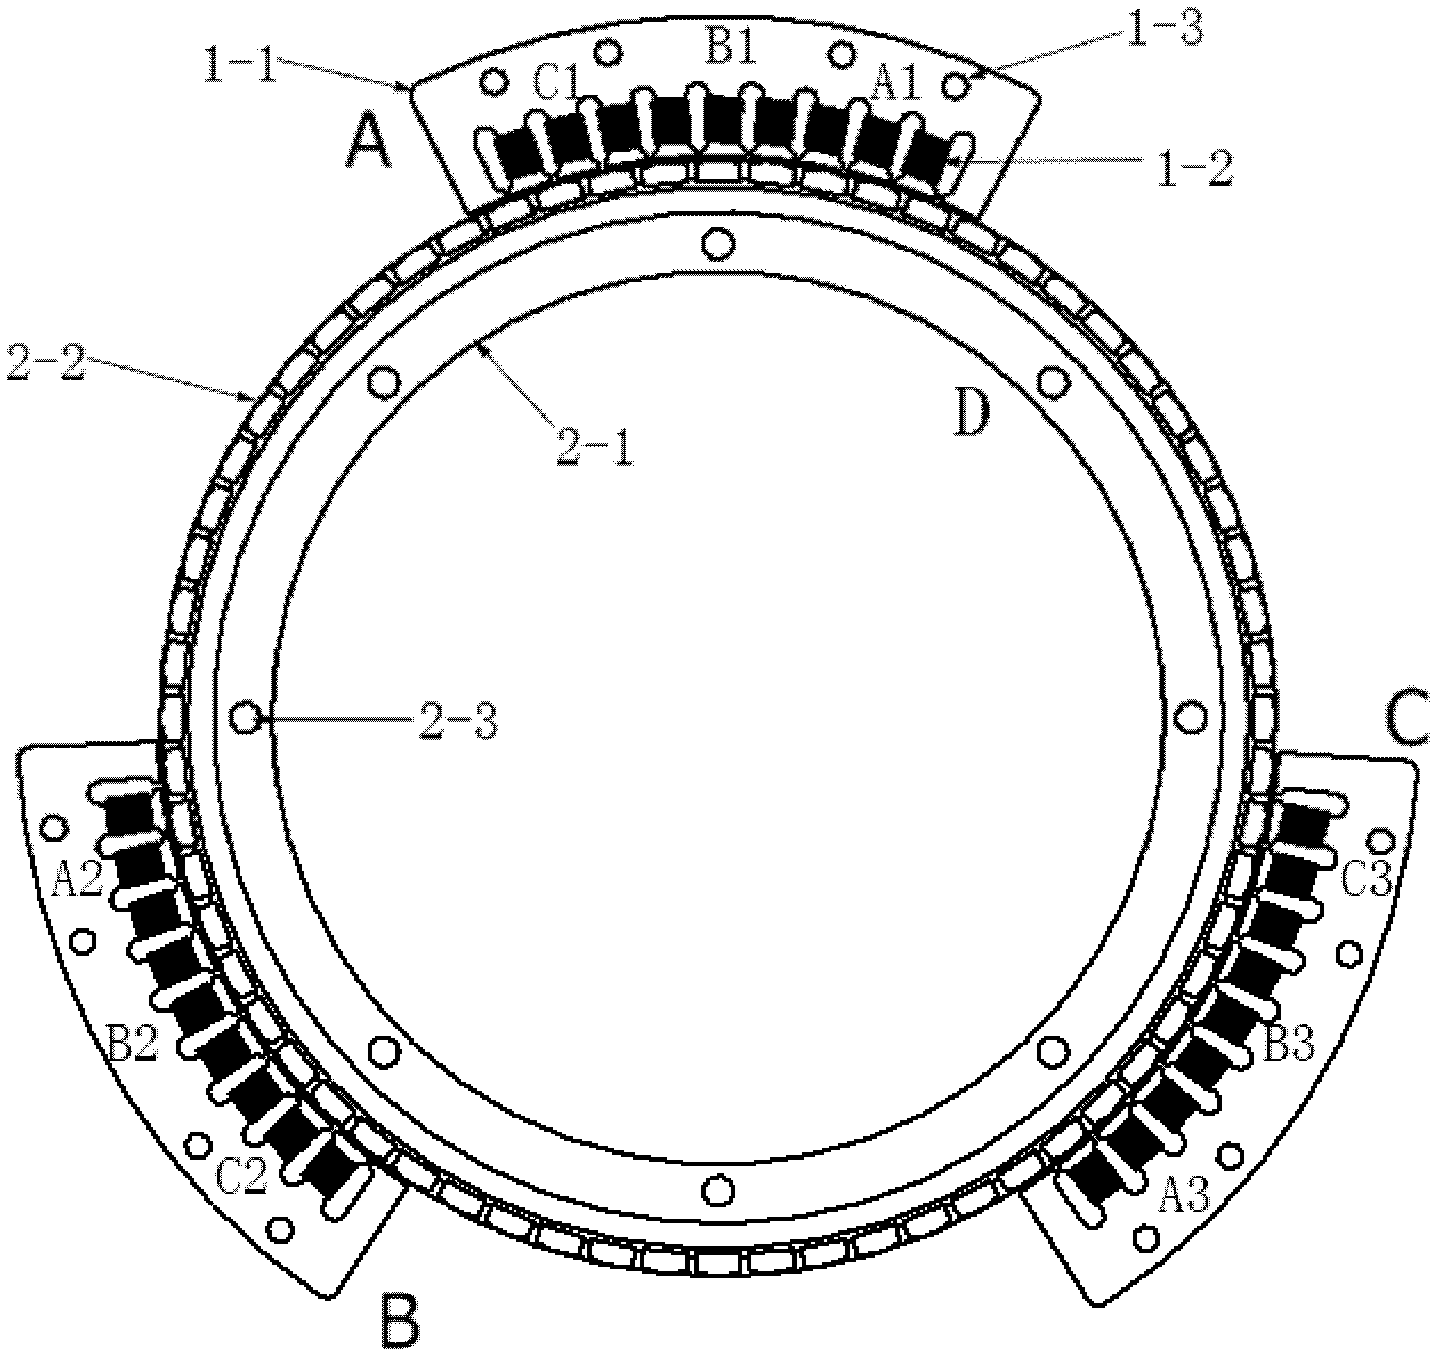 Multi-stator arc linear motor capable of reducing torque fluctuation